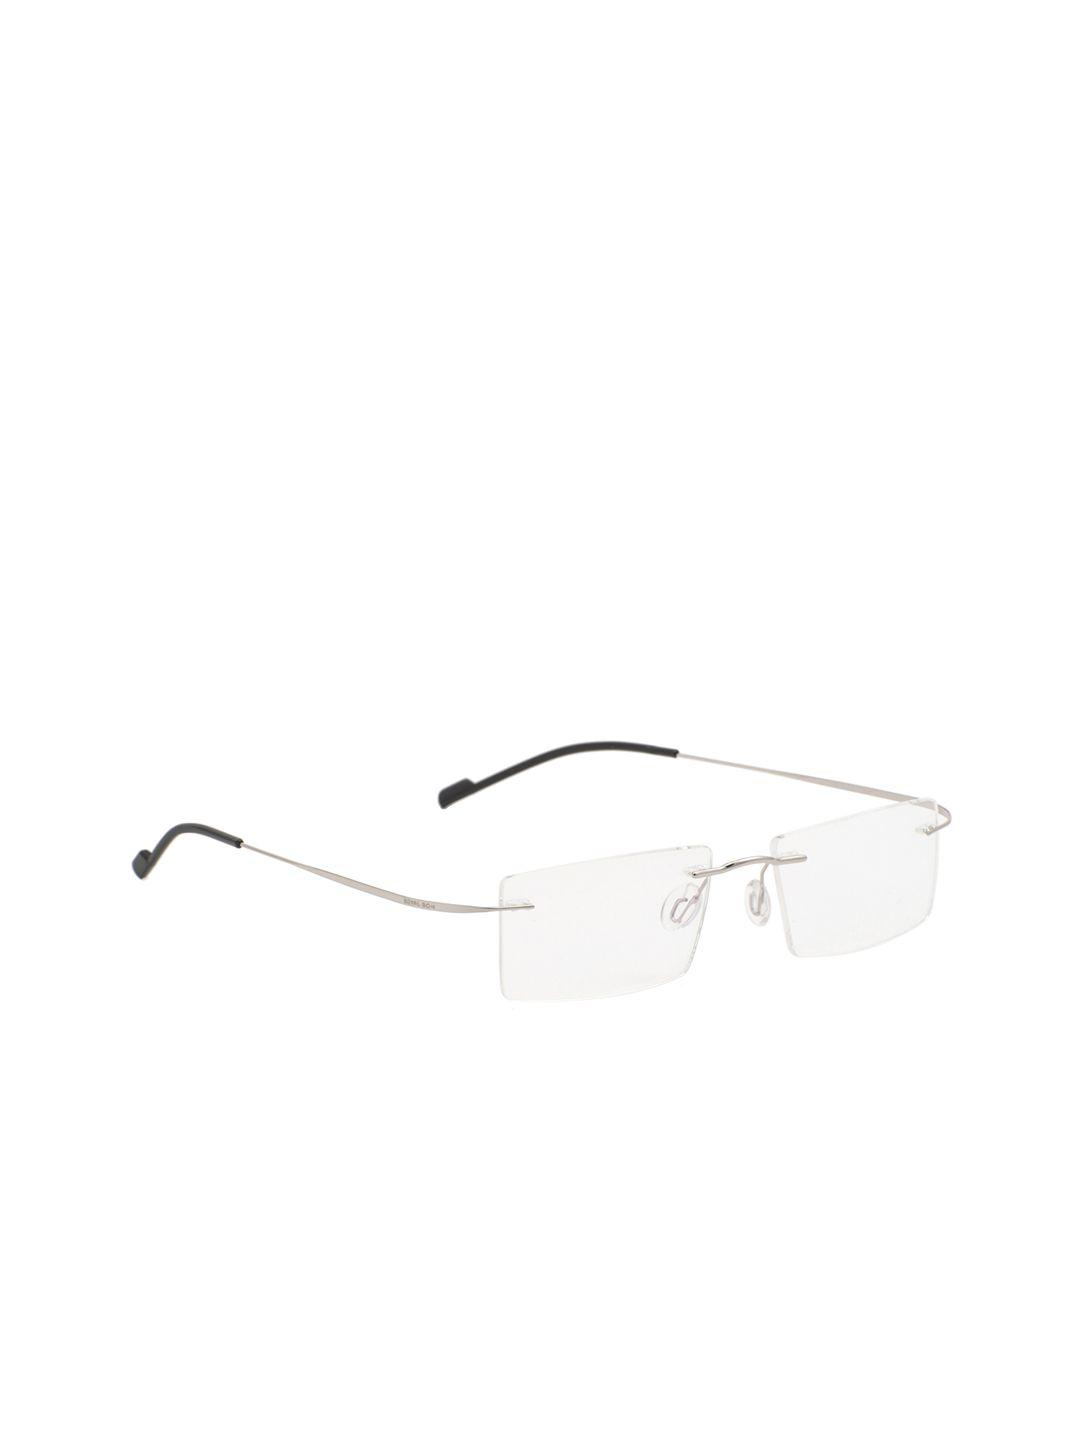 royal son unisex silver-toned solid rimless rectangle frames rs02100er